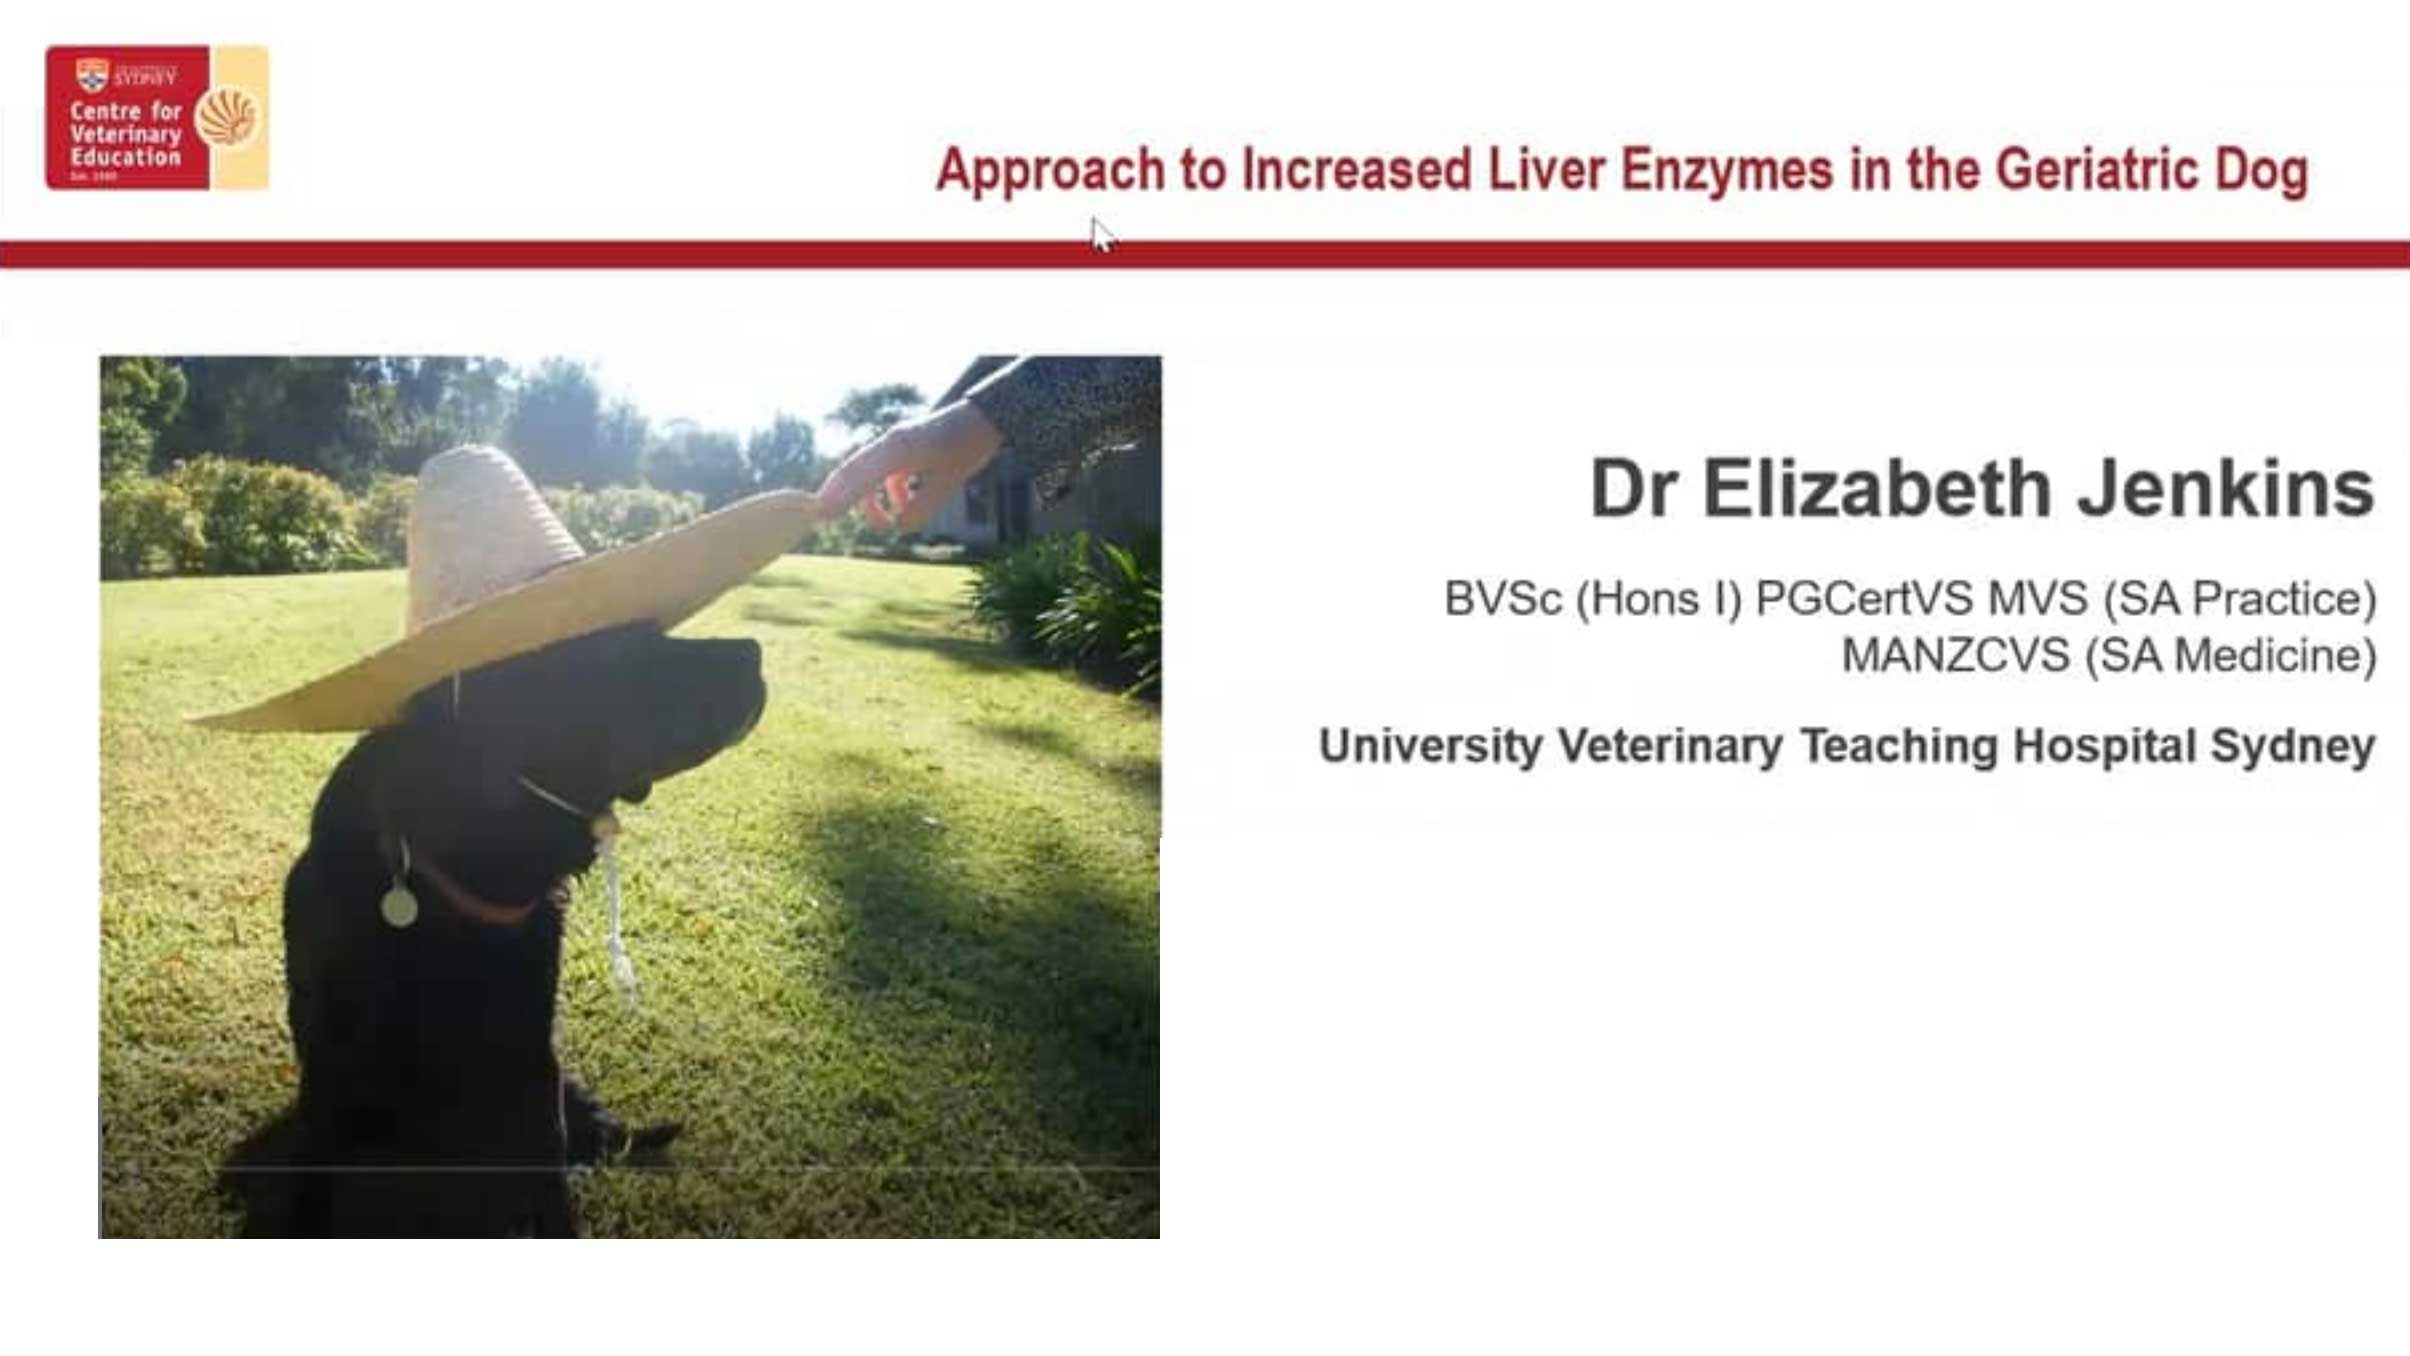 Increased Liver Enzymes in the Geriatric Dog